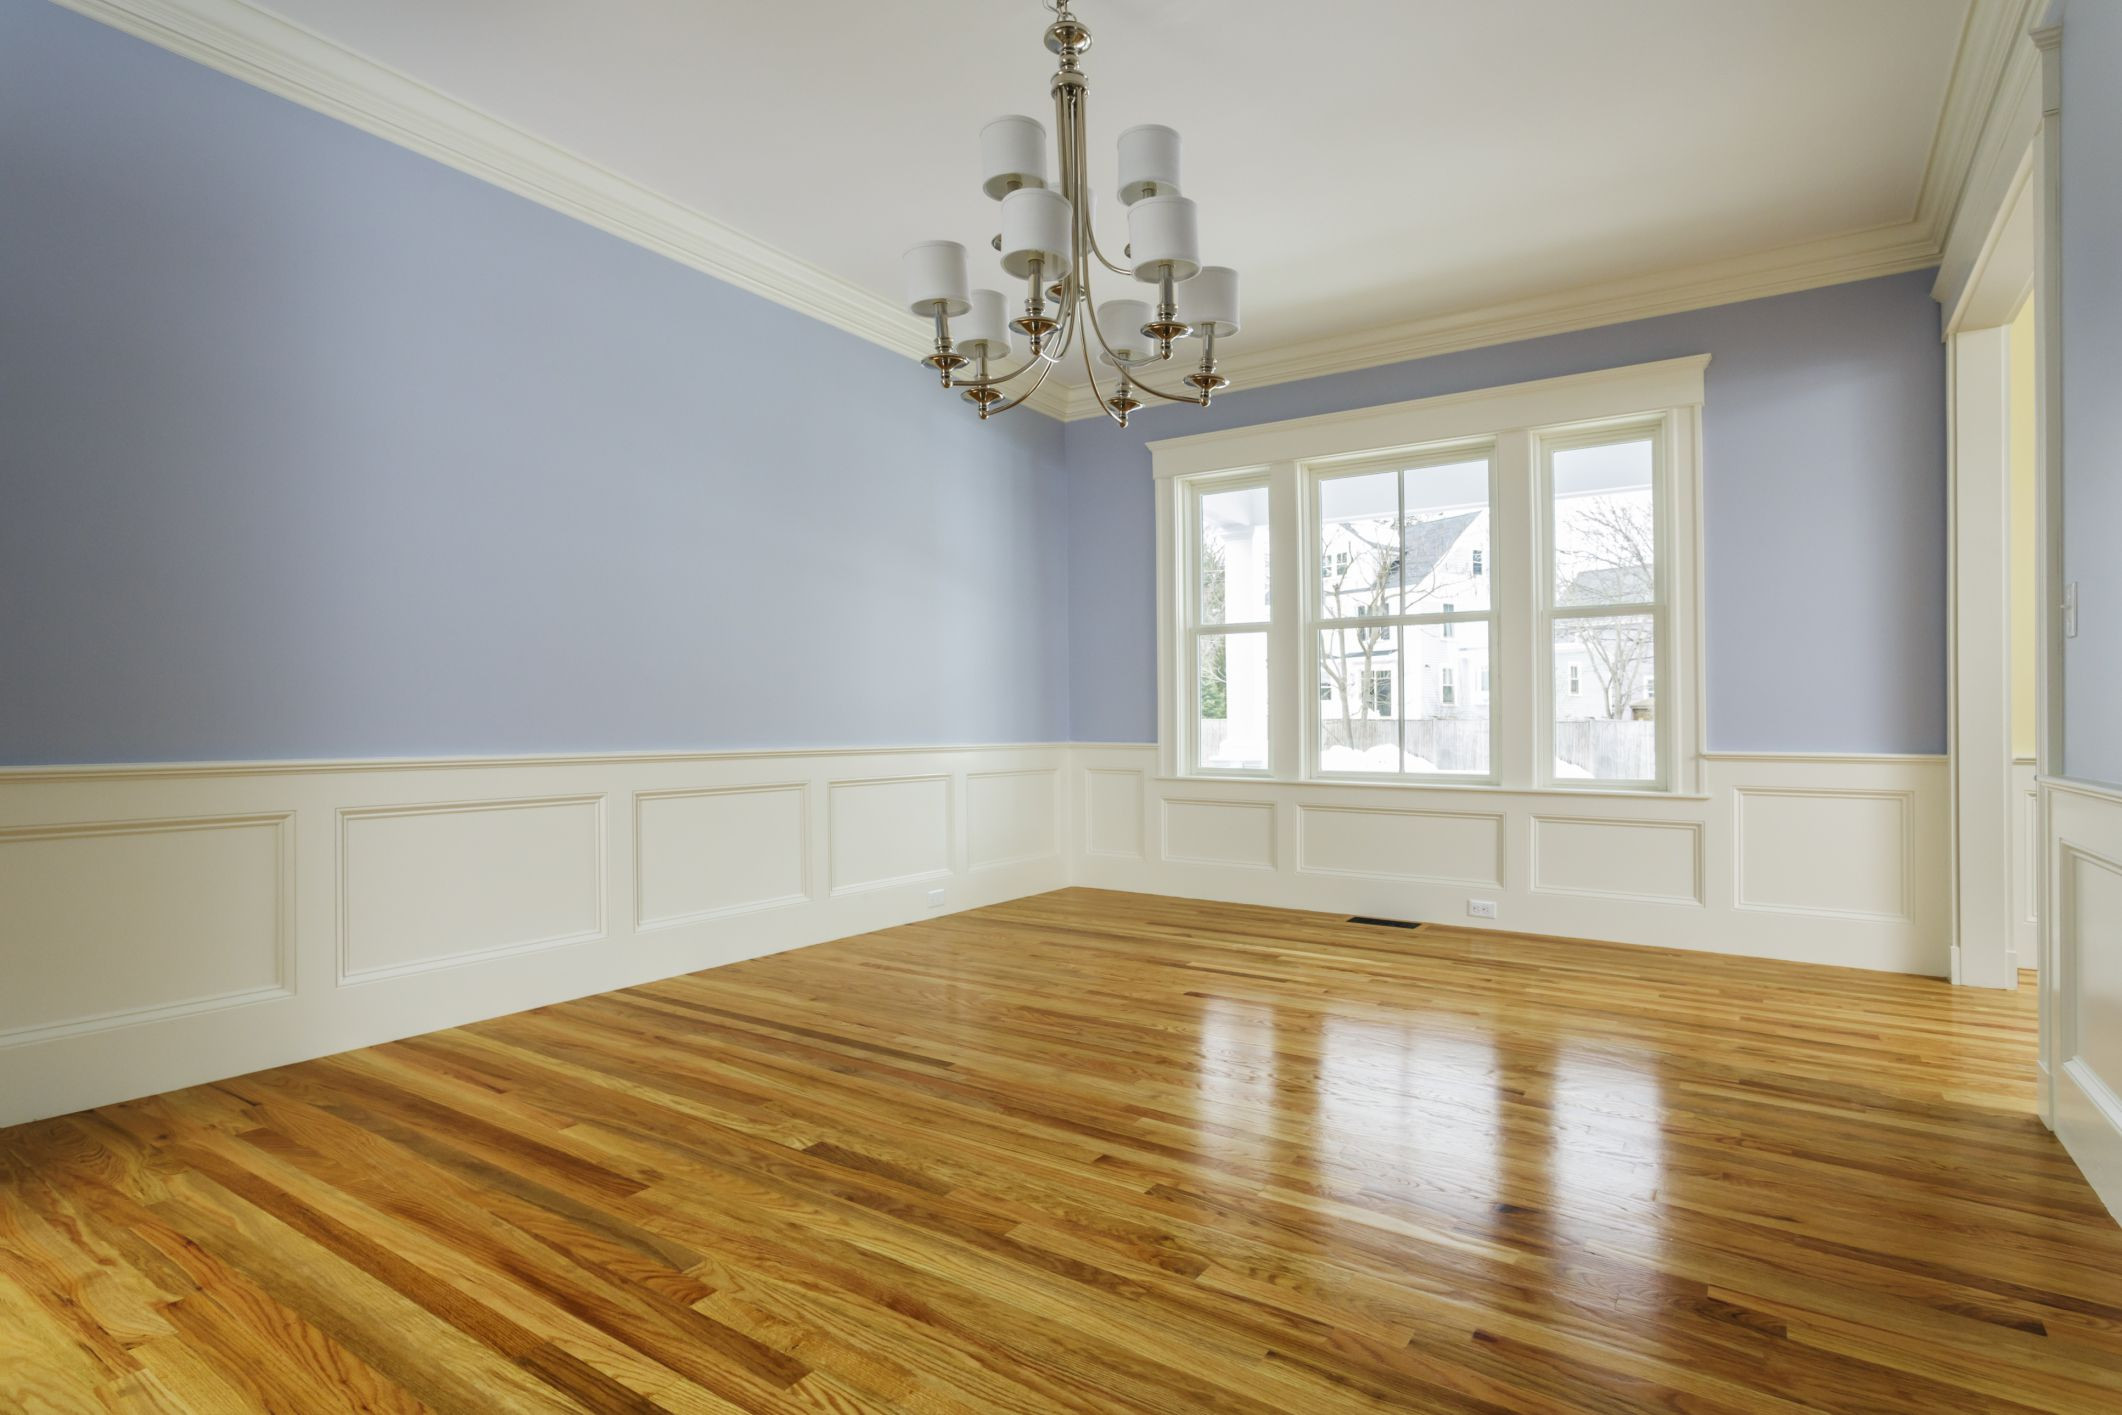 21 Awesome Hardwood Floor Refinishing Albuquerque 2024 free download hardwood floor refinishing albuquerque of how to make hardwood floors shiny with regard to 168686572 56a4e87c3df78cf7728544a2